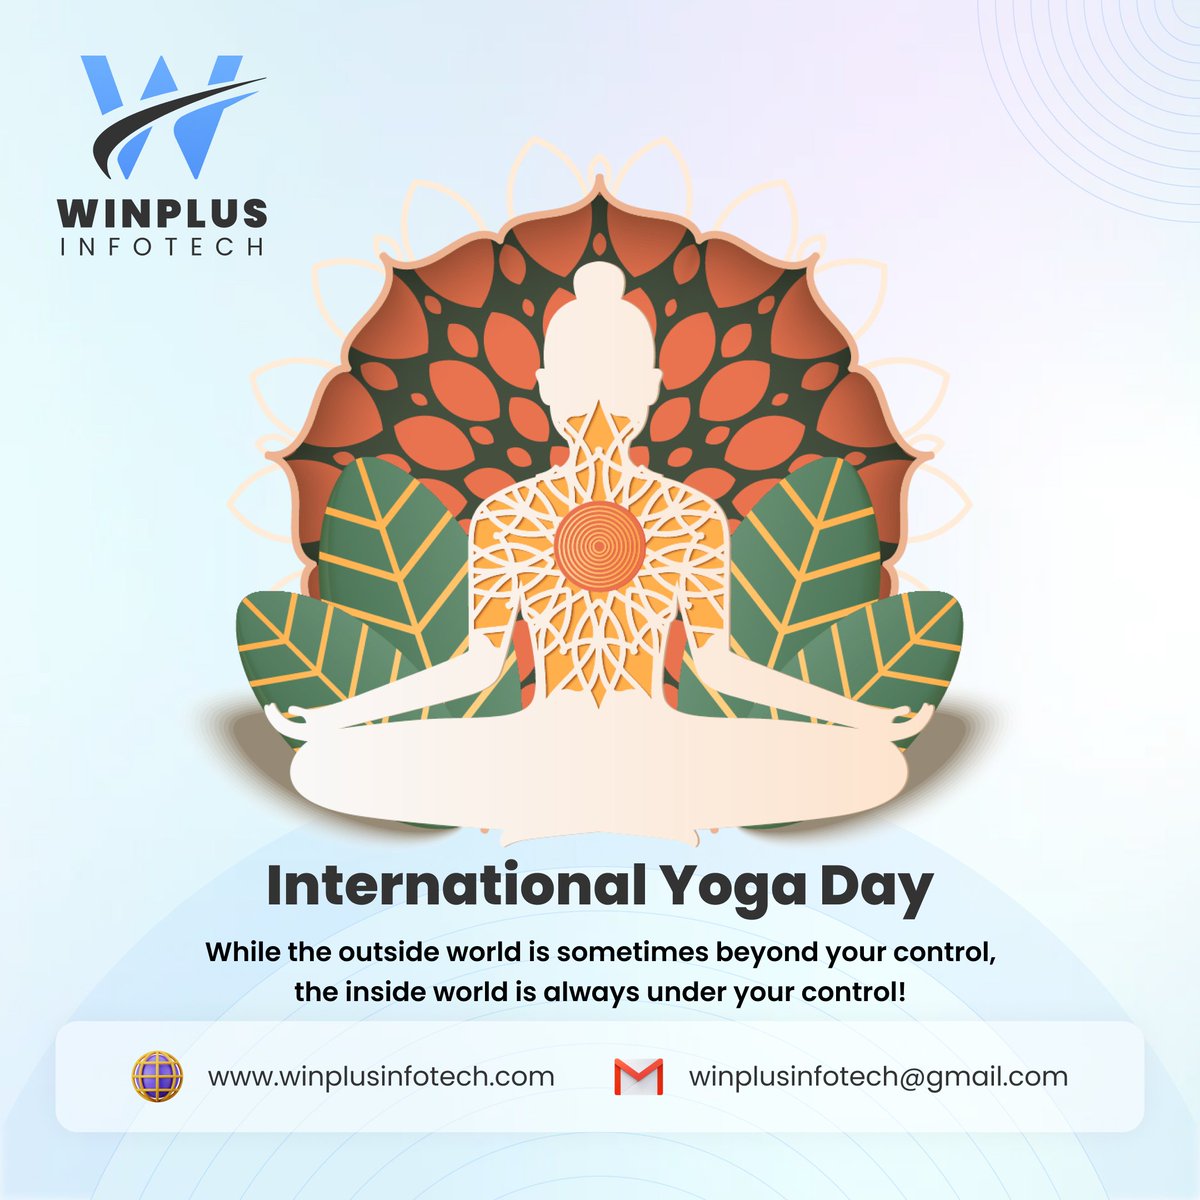 Let's celebrate the 9th International Yoga Day and commit to living healthier, happier, and more mindful lives.

#InternationalDayofYoga2023 #YogaDay #HarnisFindoliya #WinpluInfotech @harnisfindoliya @winplusinfotech